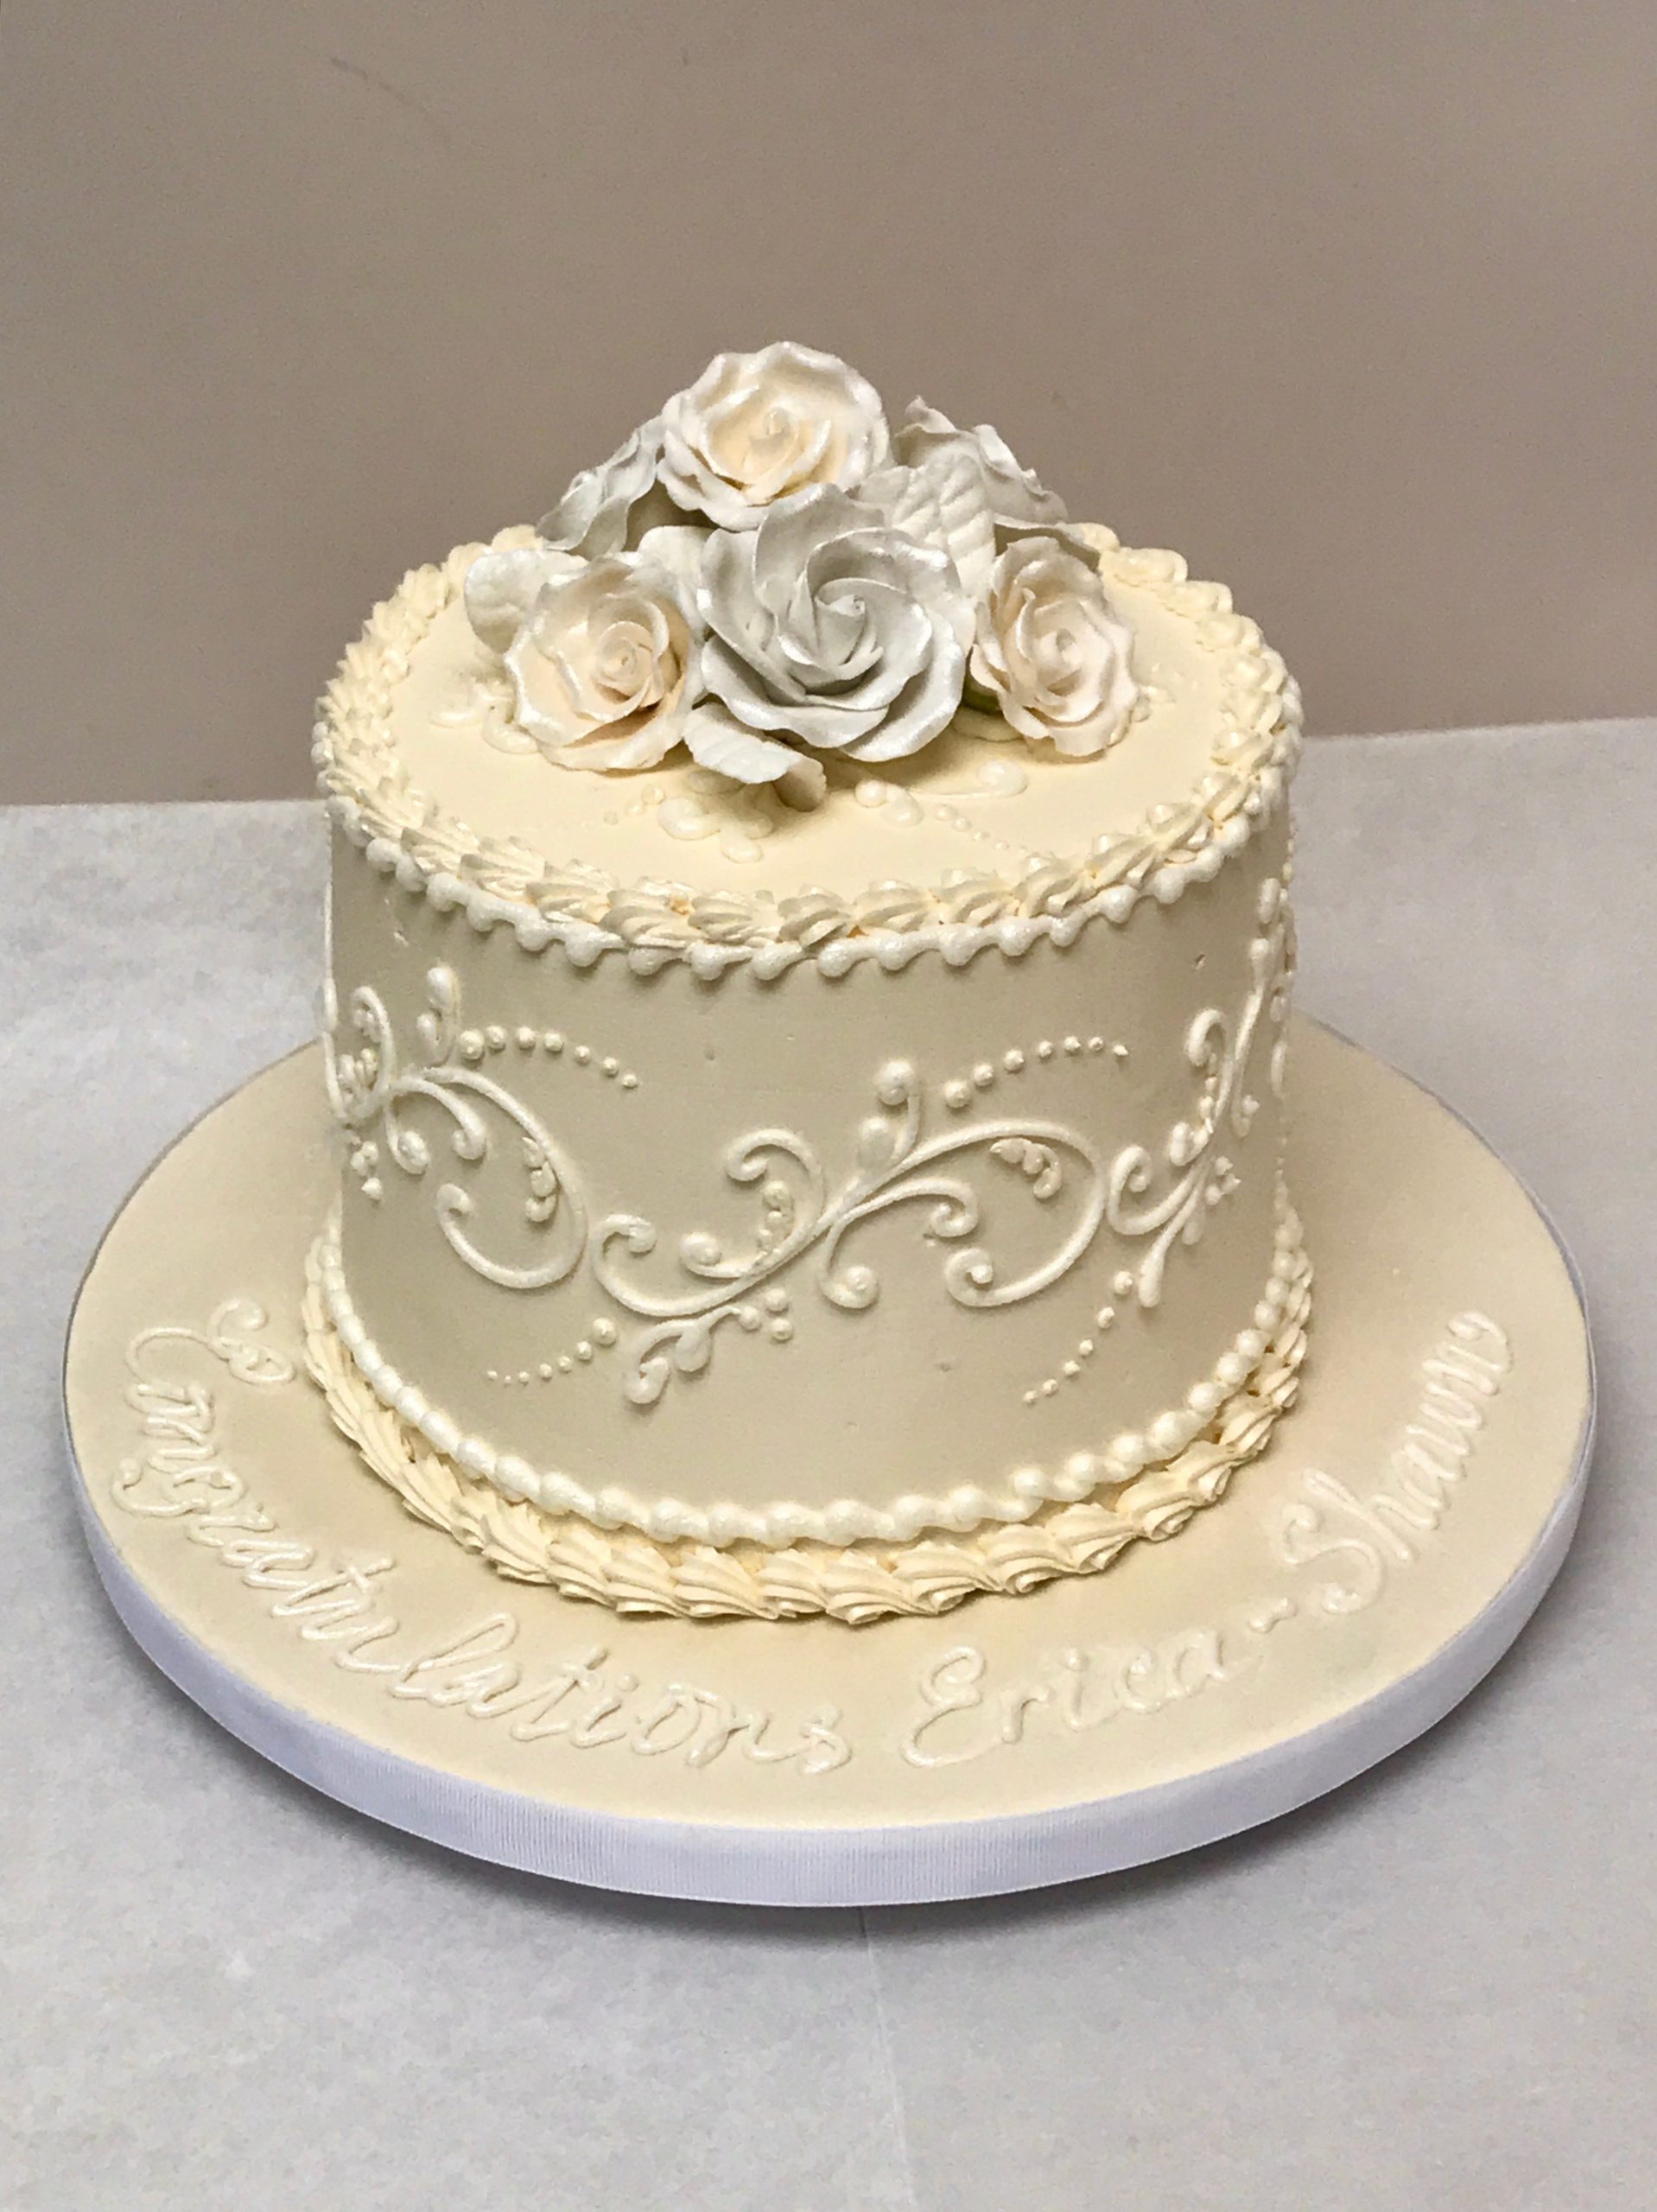 Elegant 50th Anniversary Cake in Ivory Butter Cream with G… | Flickr